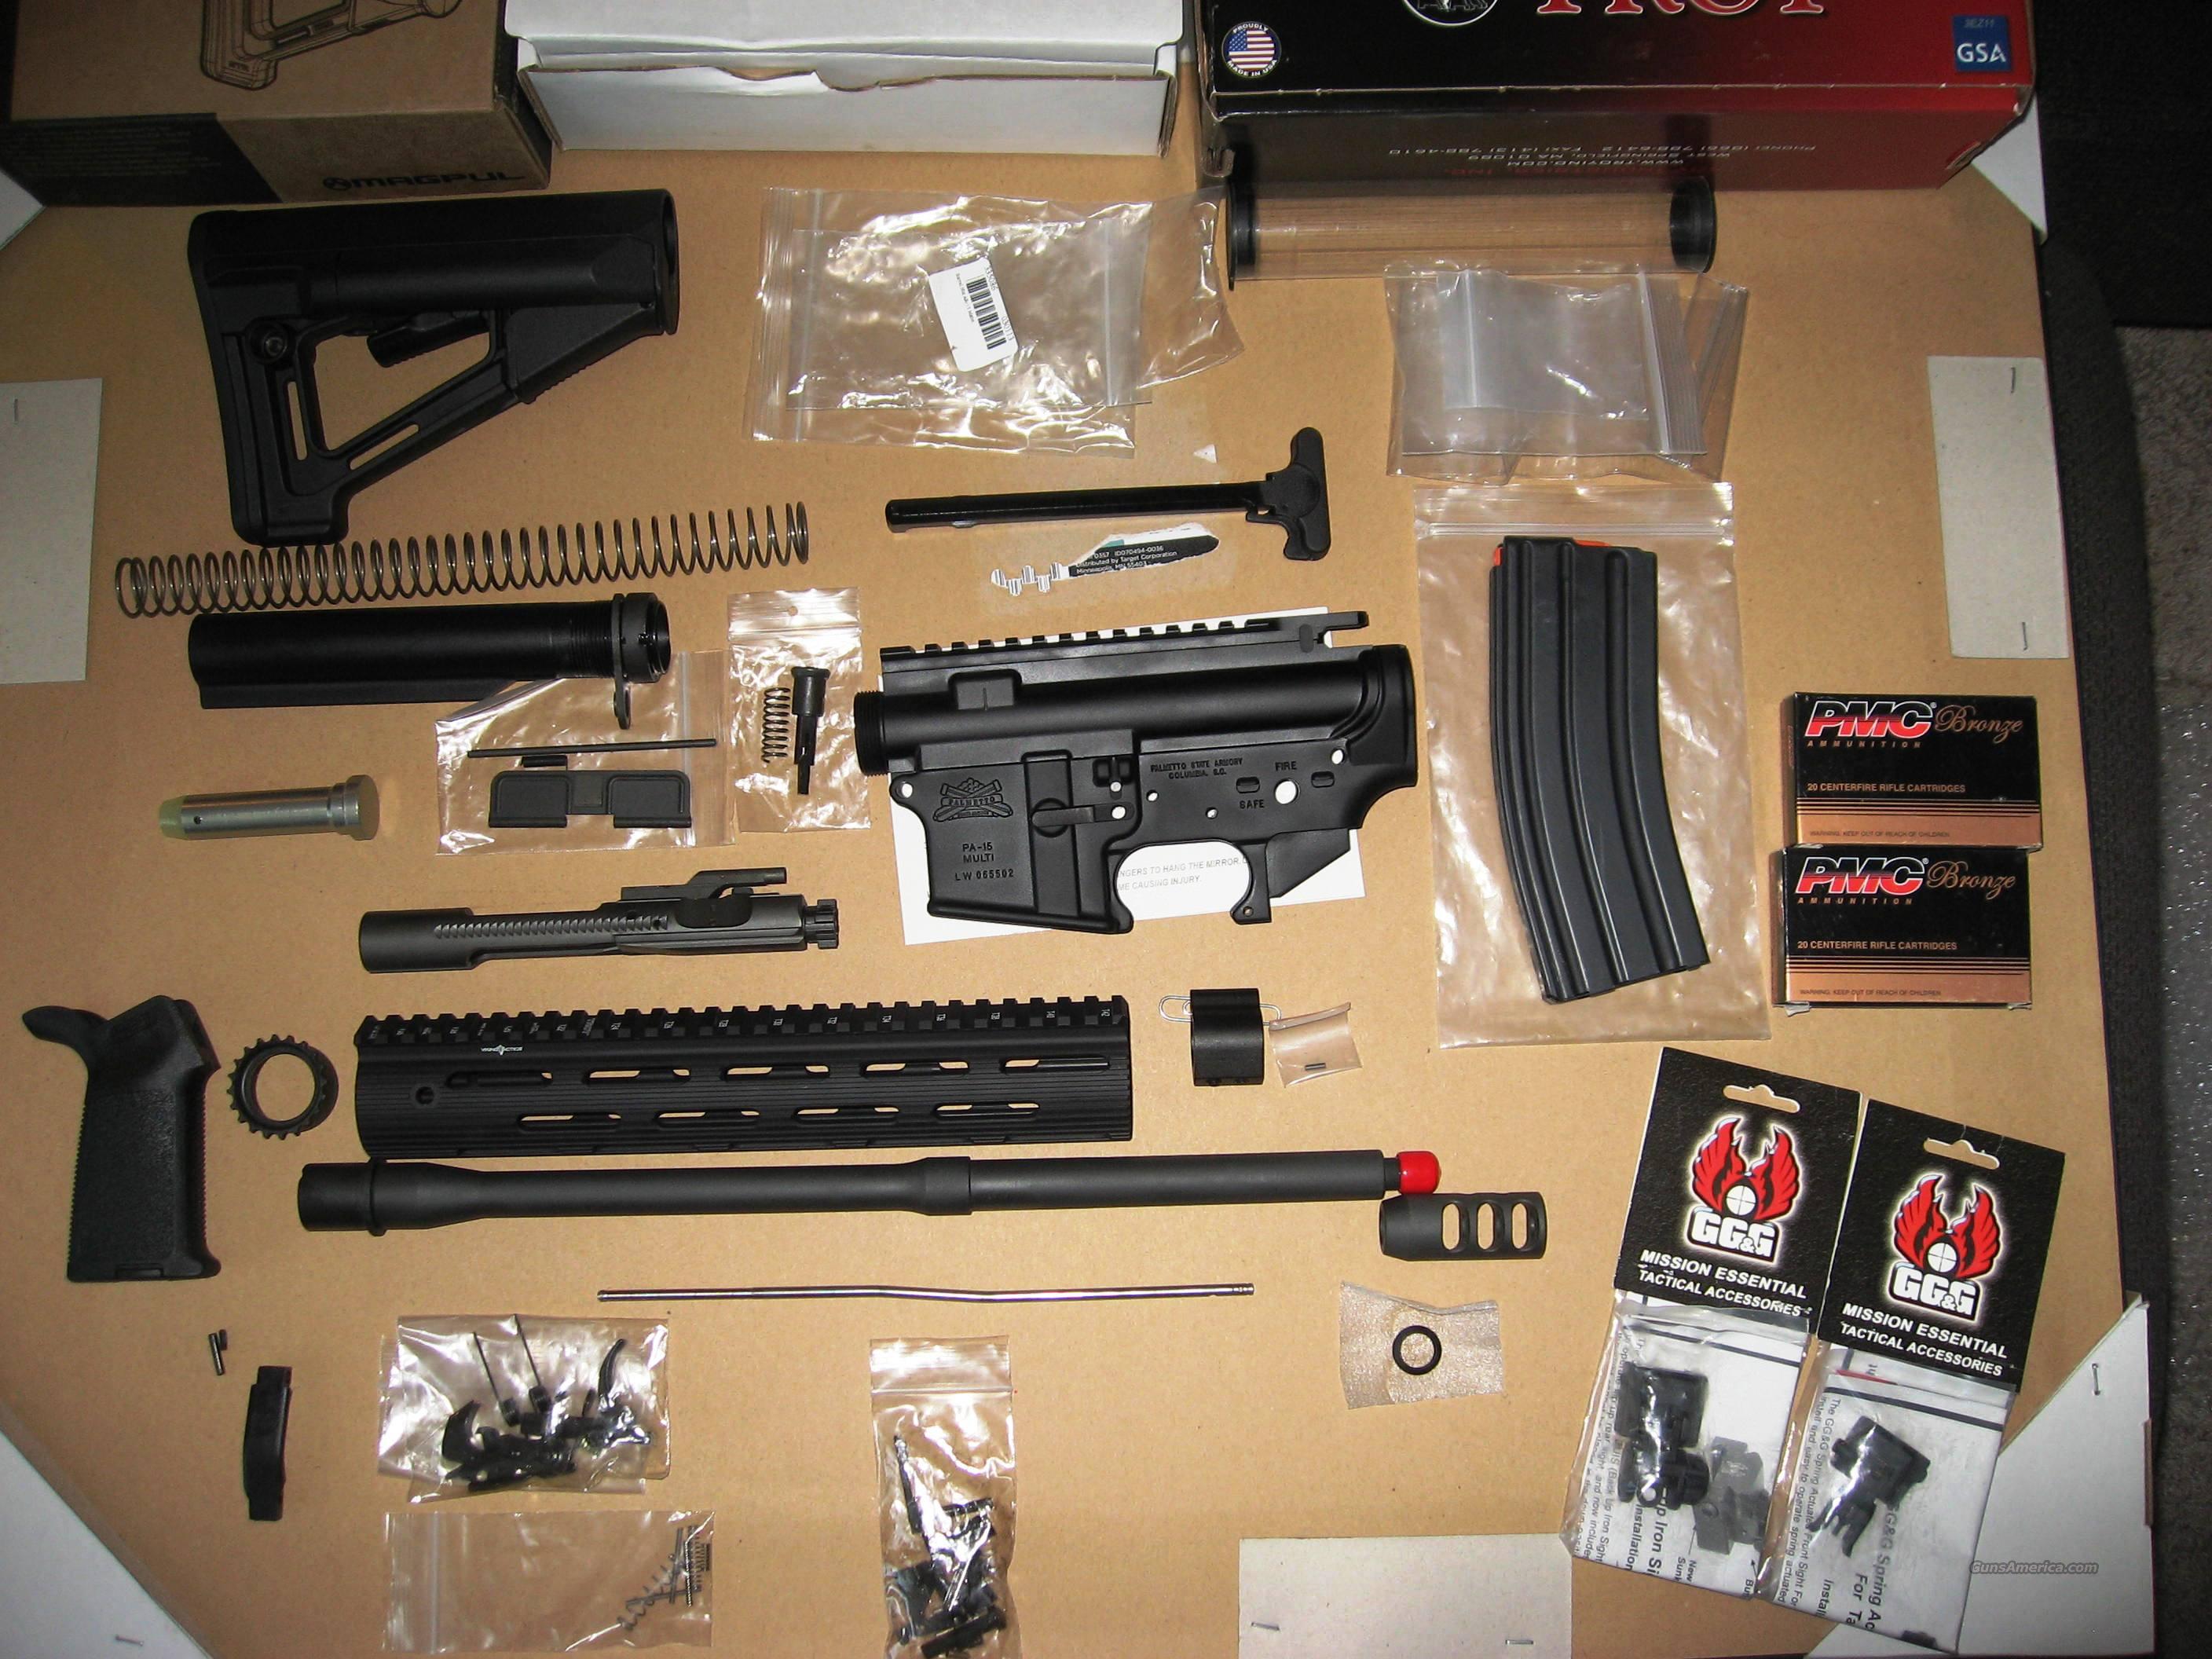 Micro Ar 15 Build Kit The Ultimate Guide For Building Your Compact